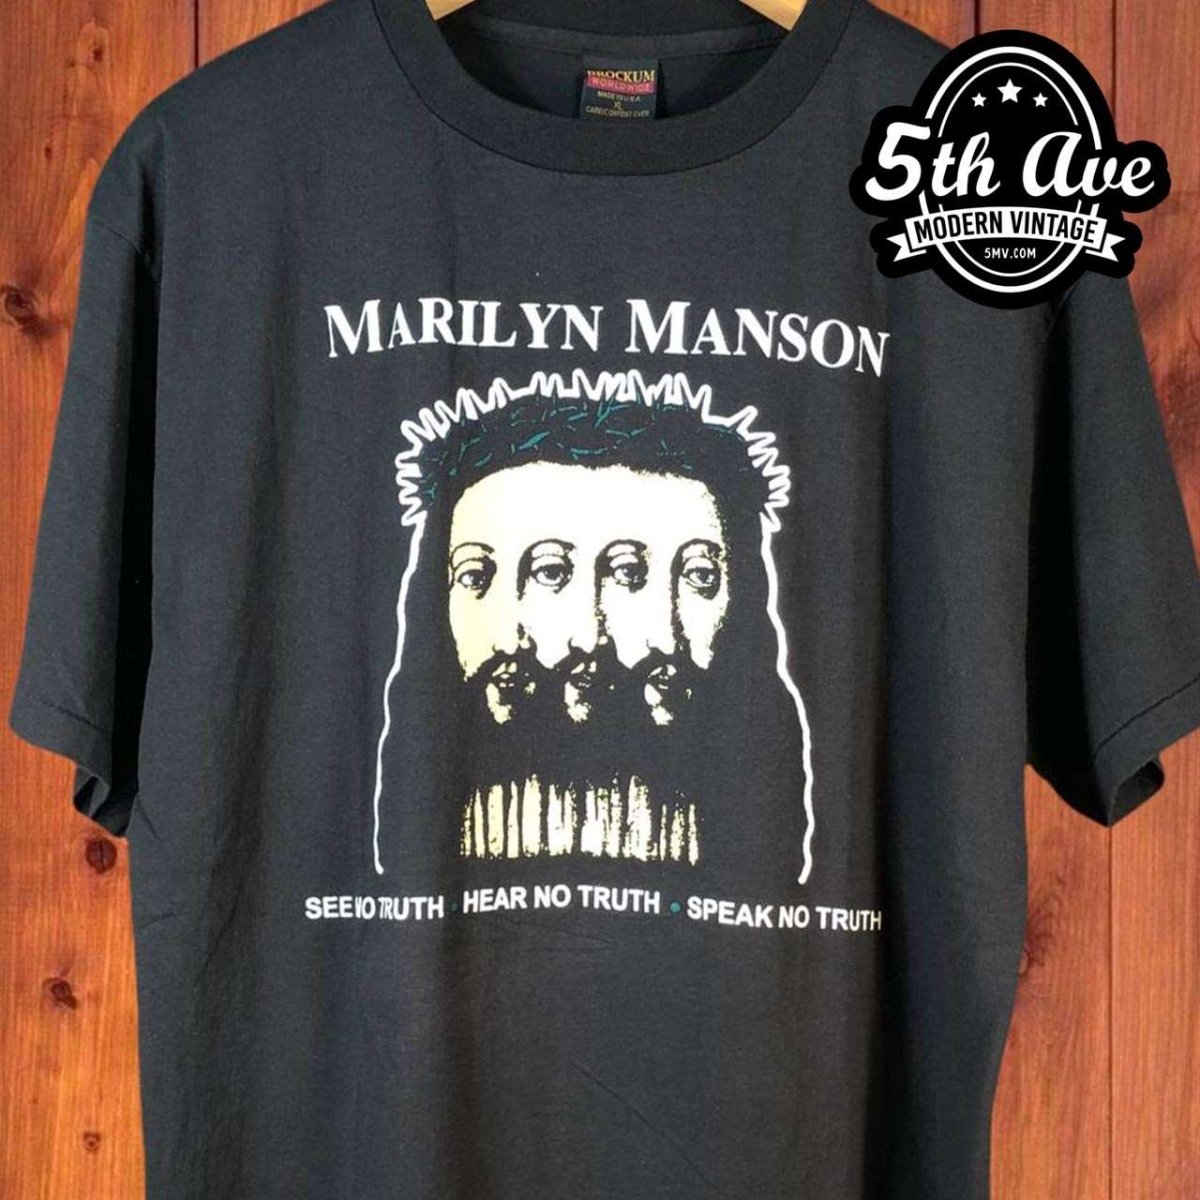 Marilyn Manson Believe - New Vintage Band T shirt - Vintage Band 